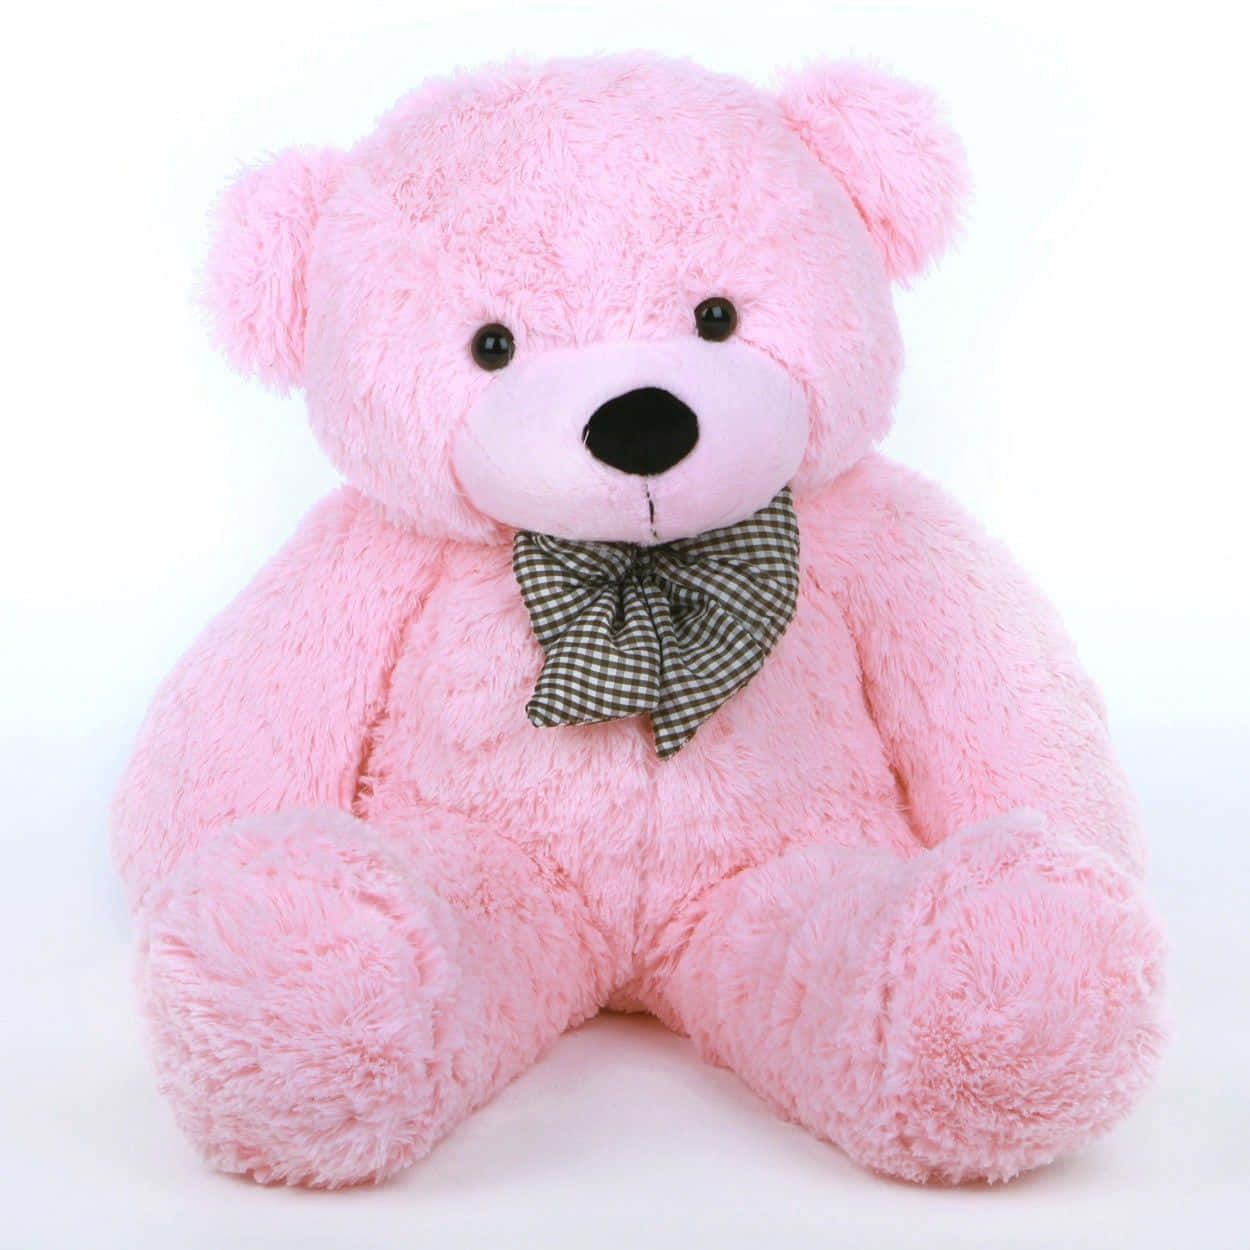 A charming pink teddy bear with a loving heart. Wallpaper